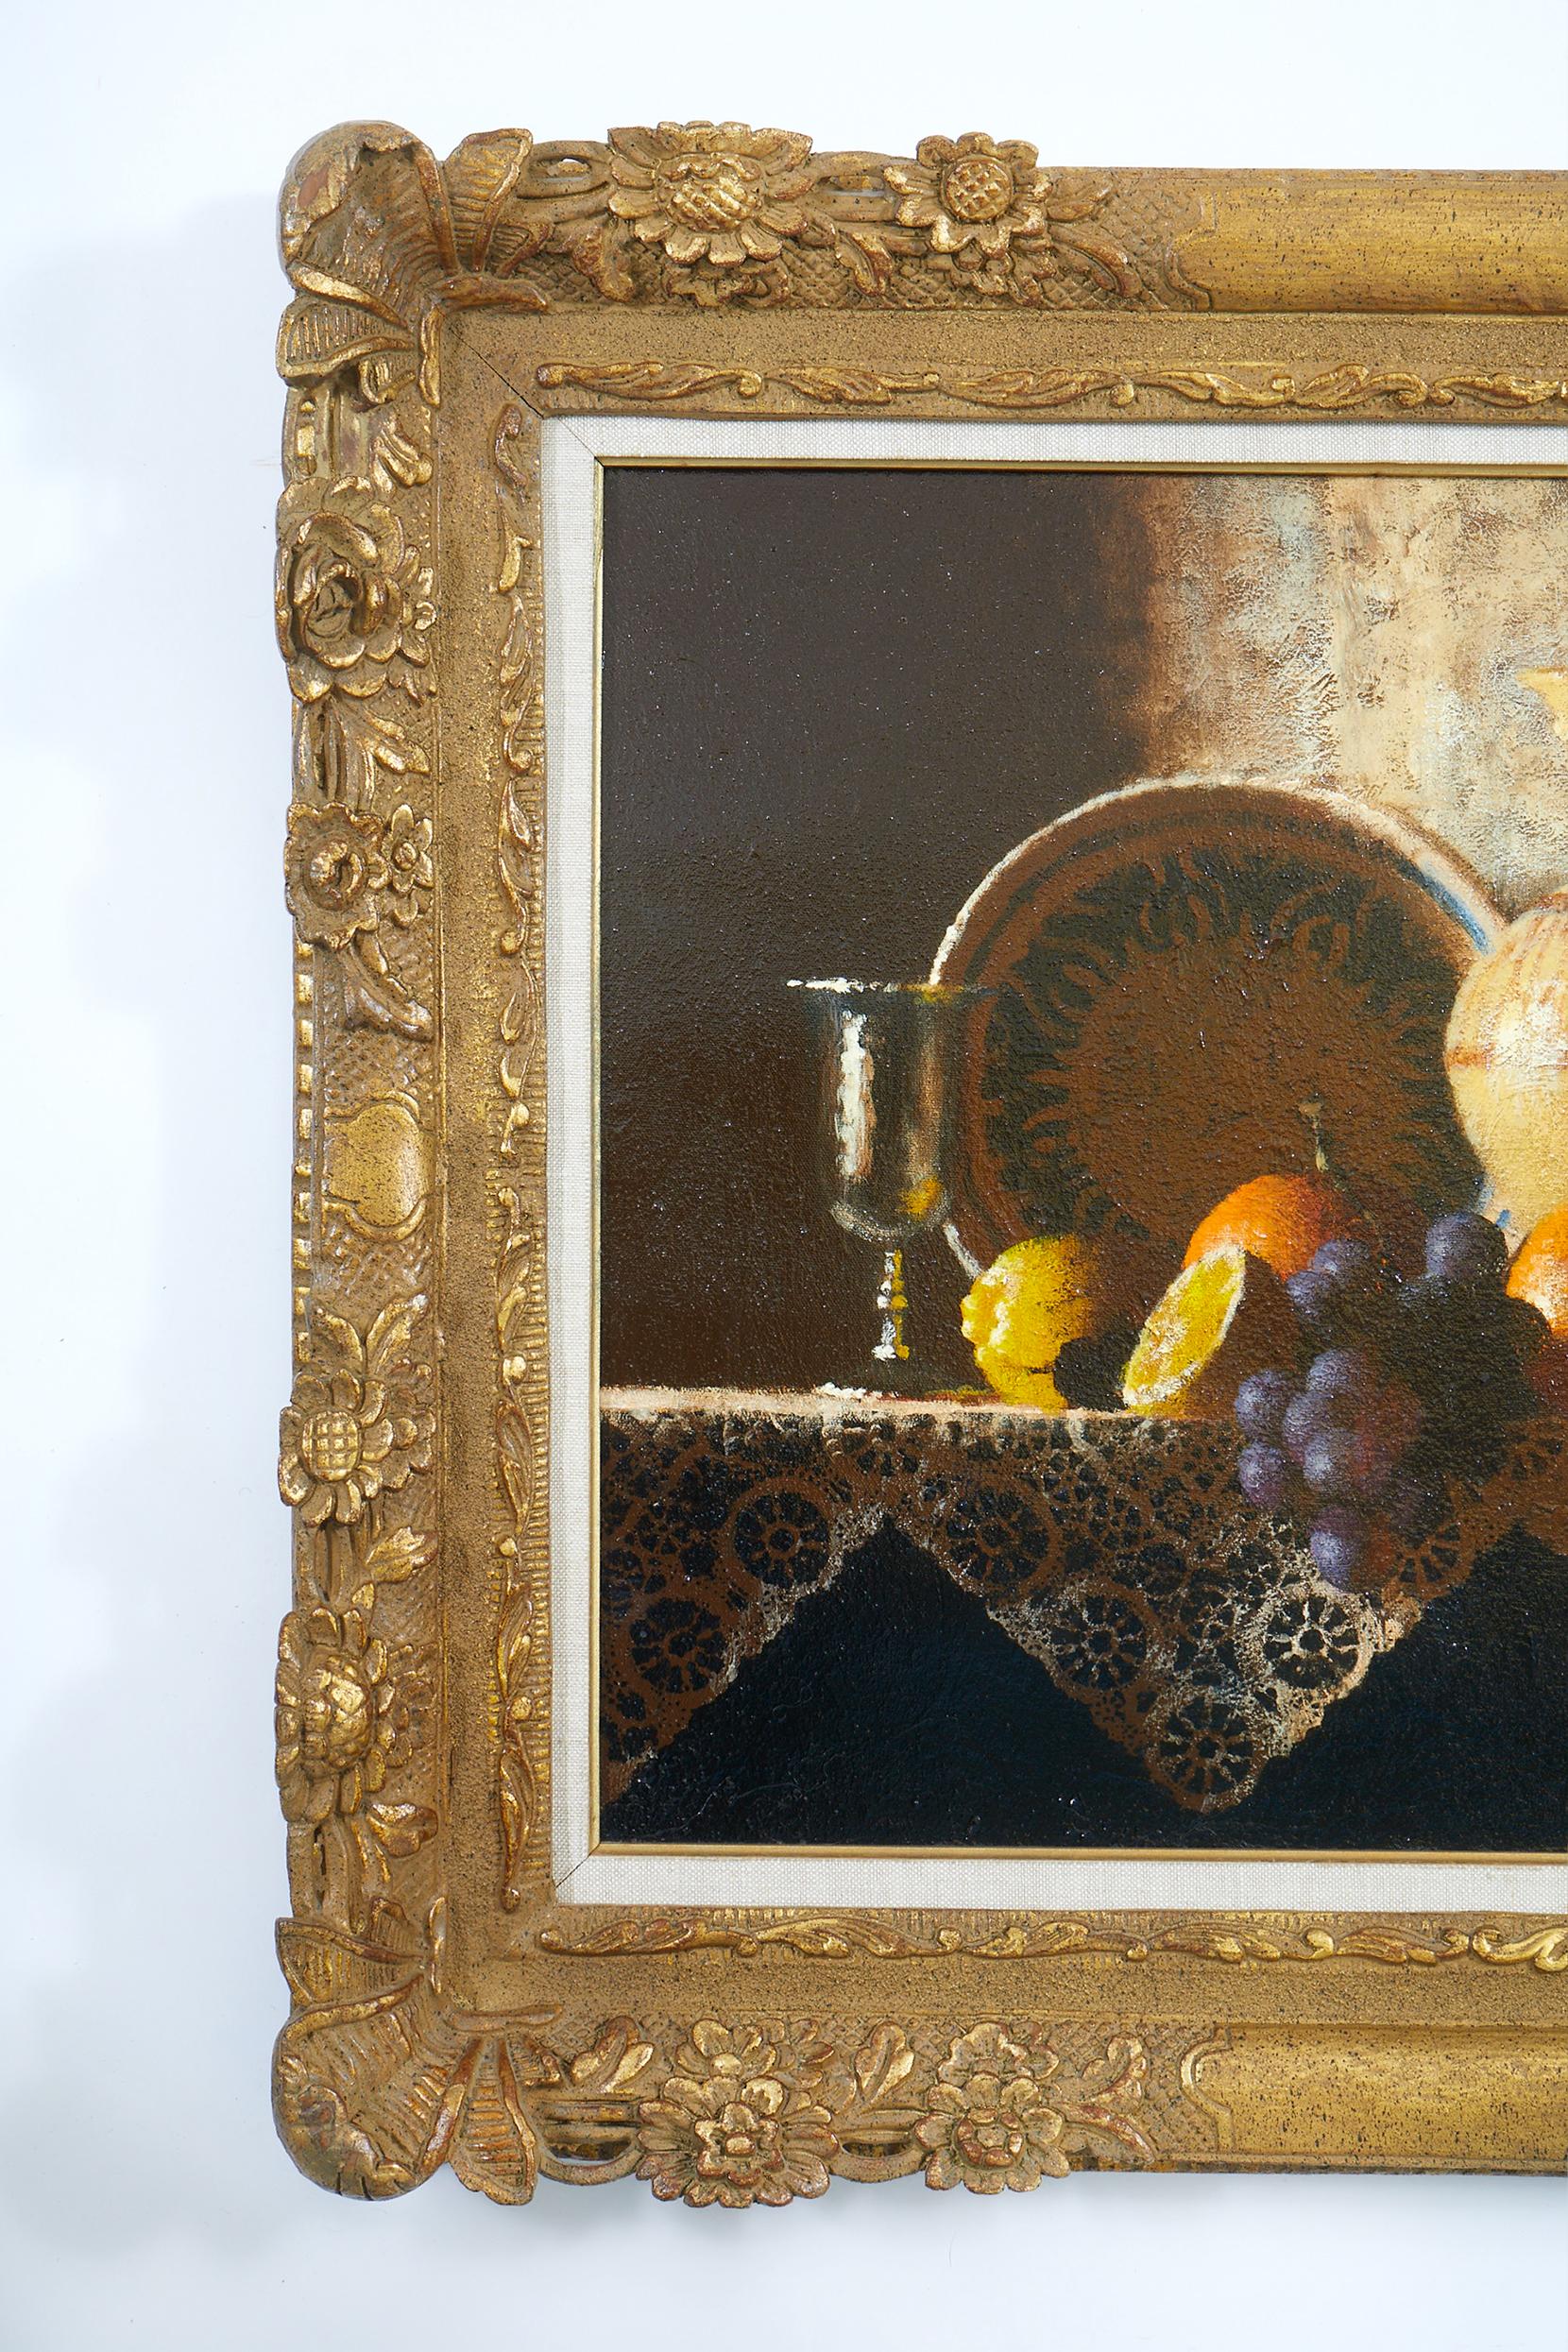 19th Century gilt wood framed oil on canvas painting featuring tableware and fruits . The painting is in good antique condition . Minor wear consistent with age / use . Artist signature lower left corner . The oil / canvas painting was relined . The